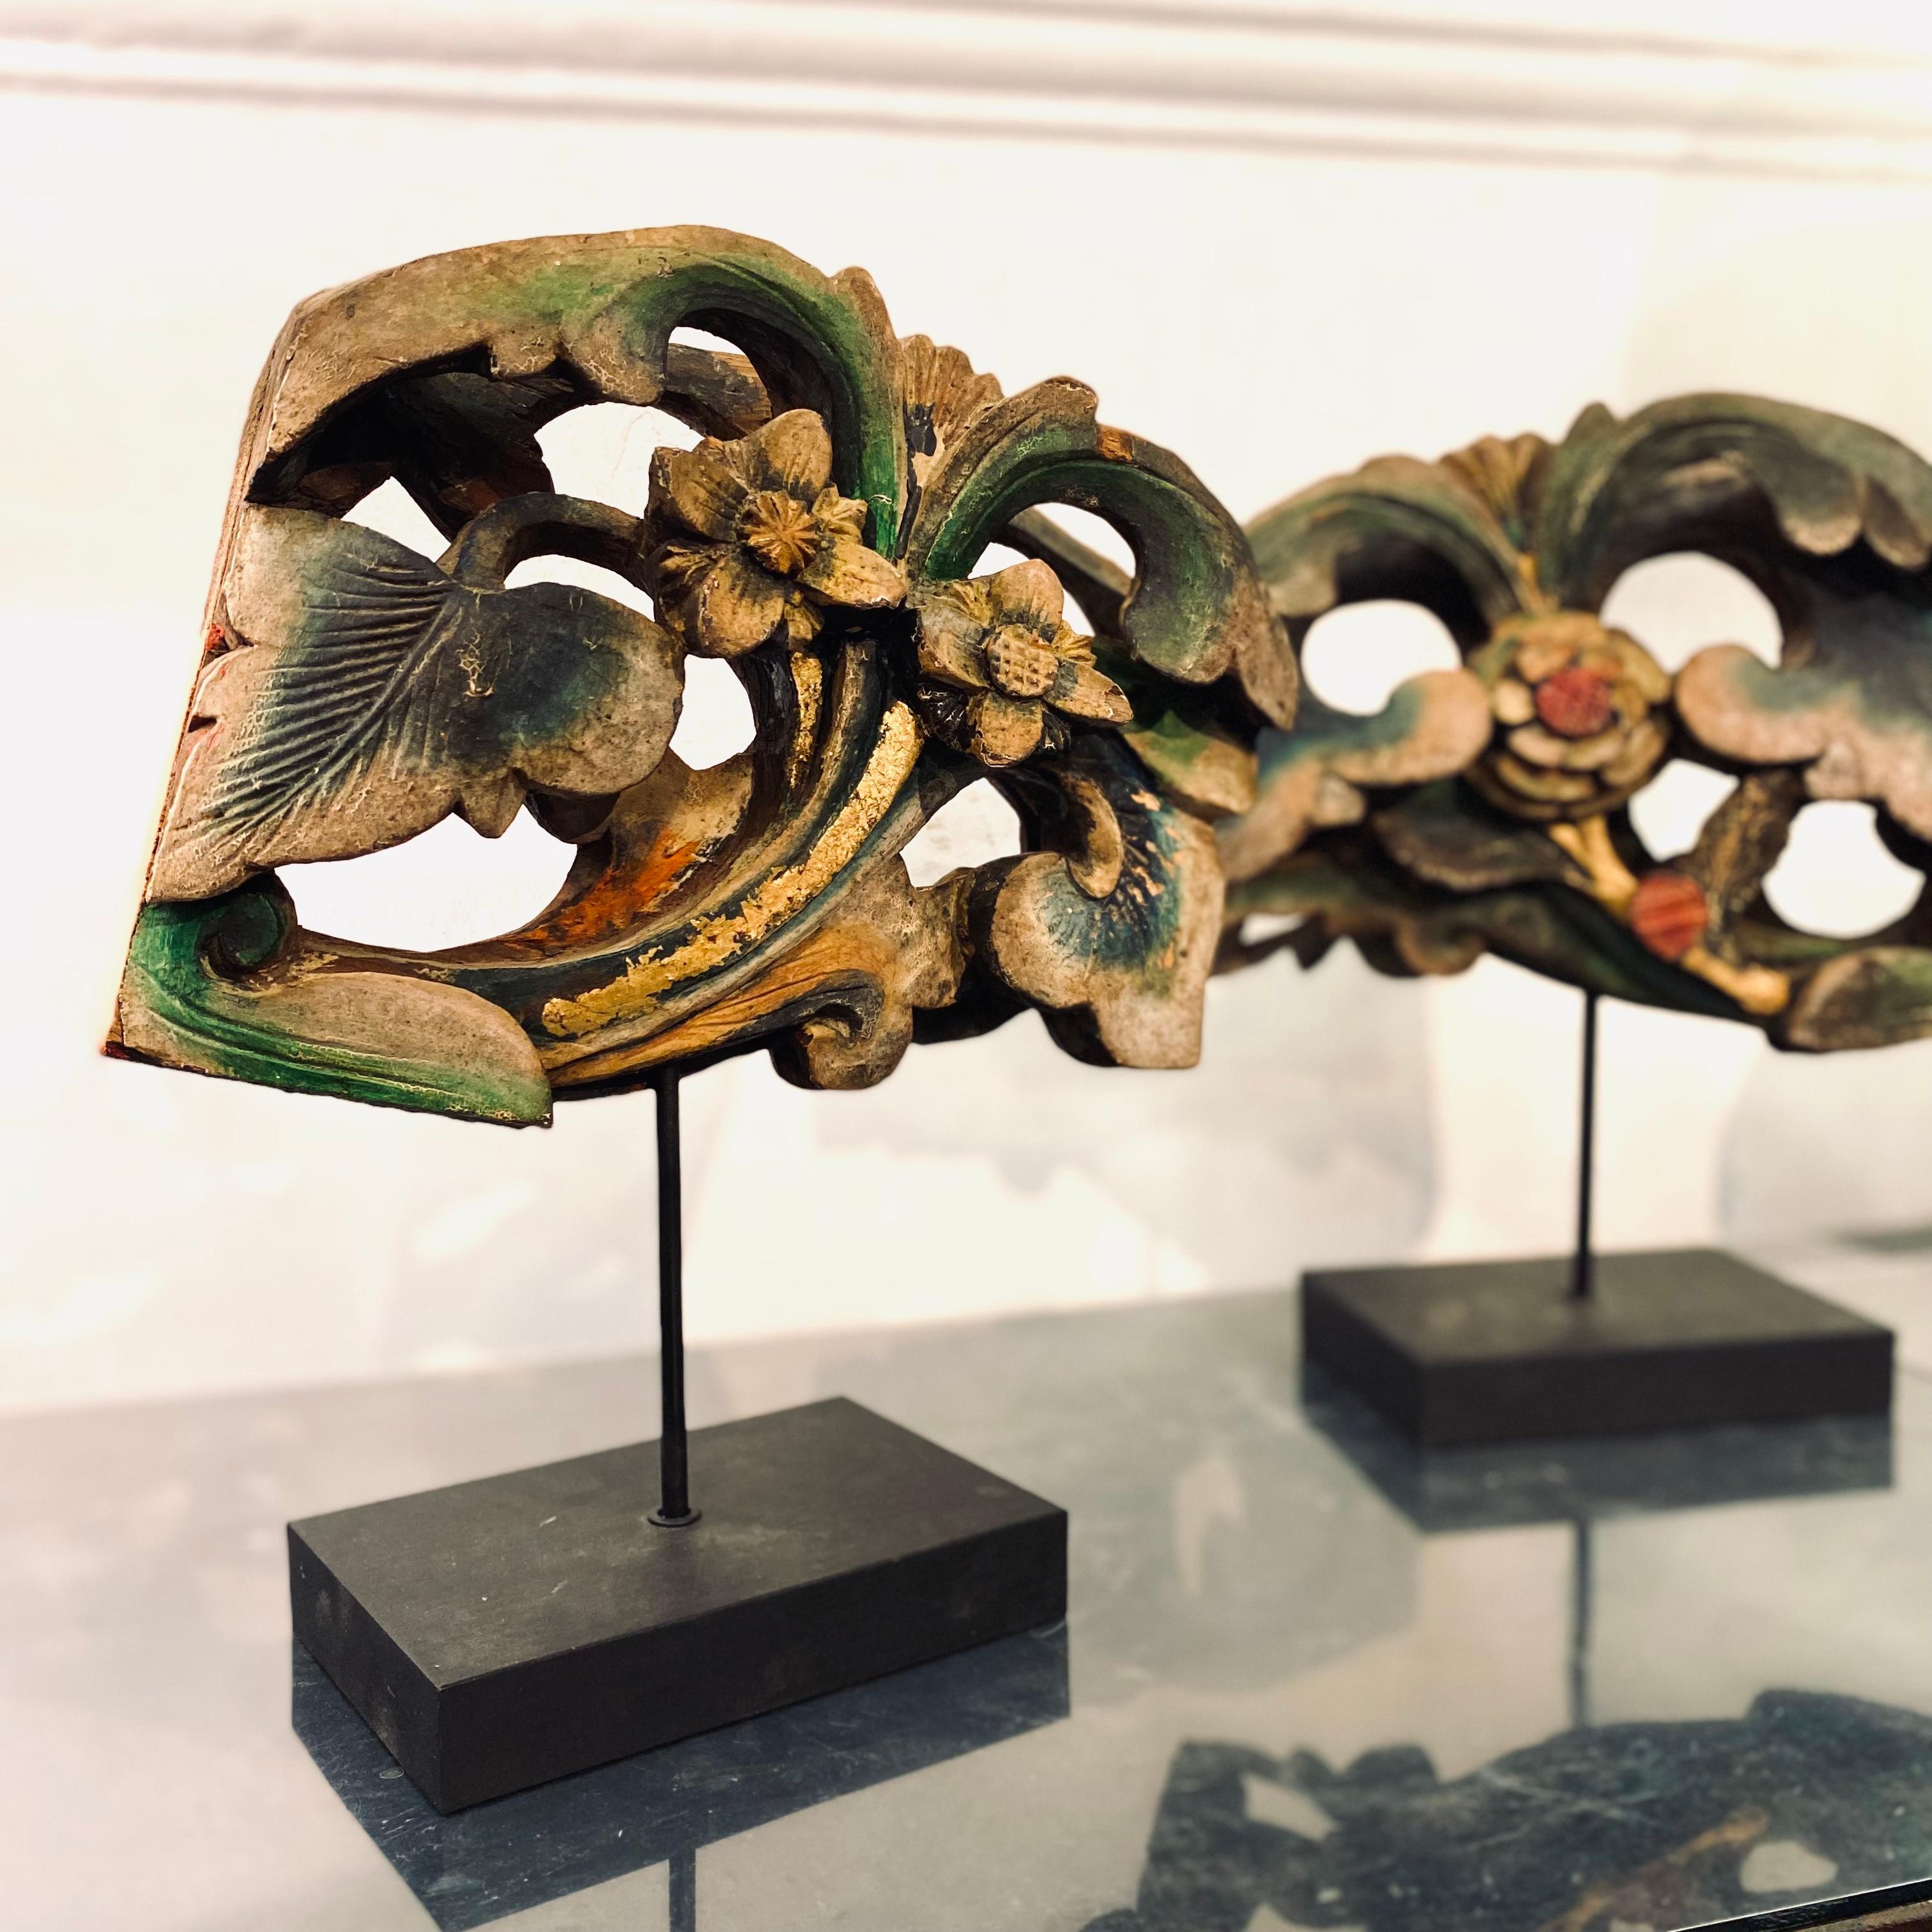 A pair of wood carvings with beautiful original colour from Fujian province. These used to parts of pillar or column decorations, but as most of the column was damaged, these were salvaged and put on new stands to become display pieces. The original